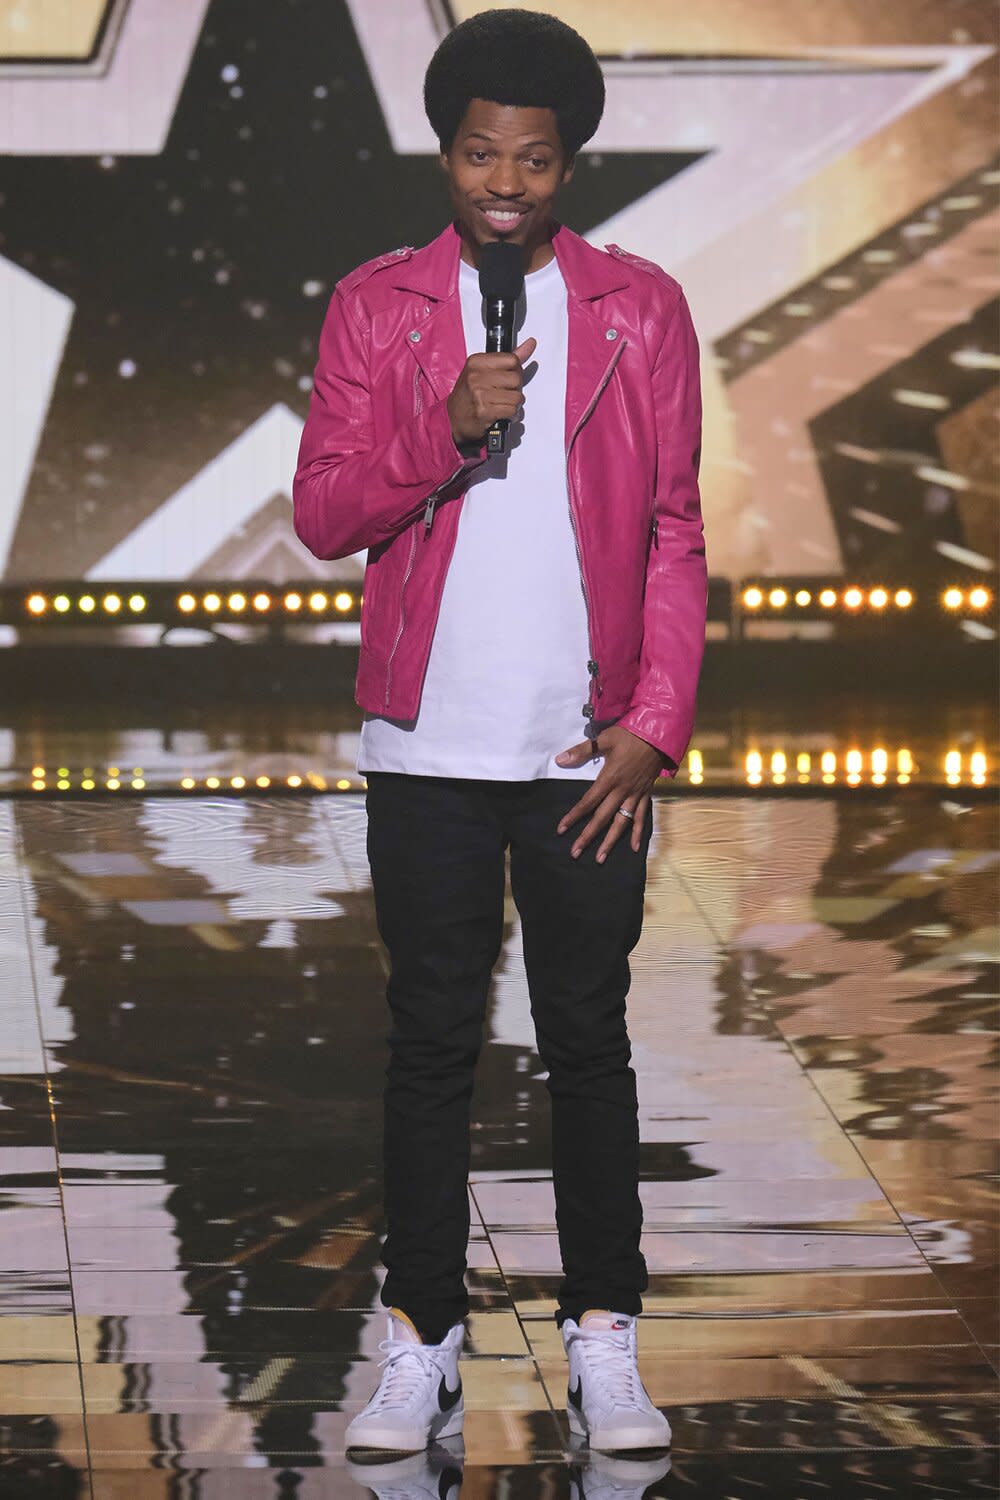 AMERICA'S GOT TALENT: ALL-STARS -- "Auditions 3" Episode 103 -- Pictured: Mike E. Winfield -- (Photo by: Trae Patton/NBC)